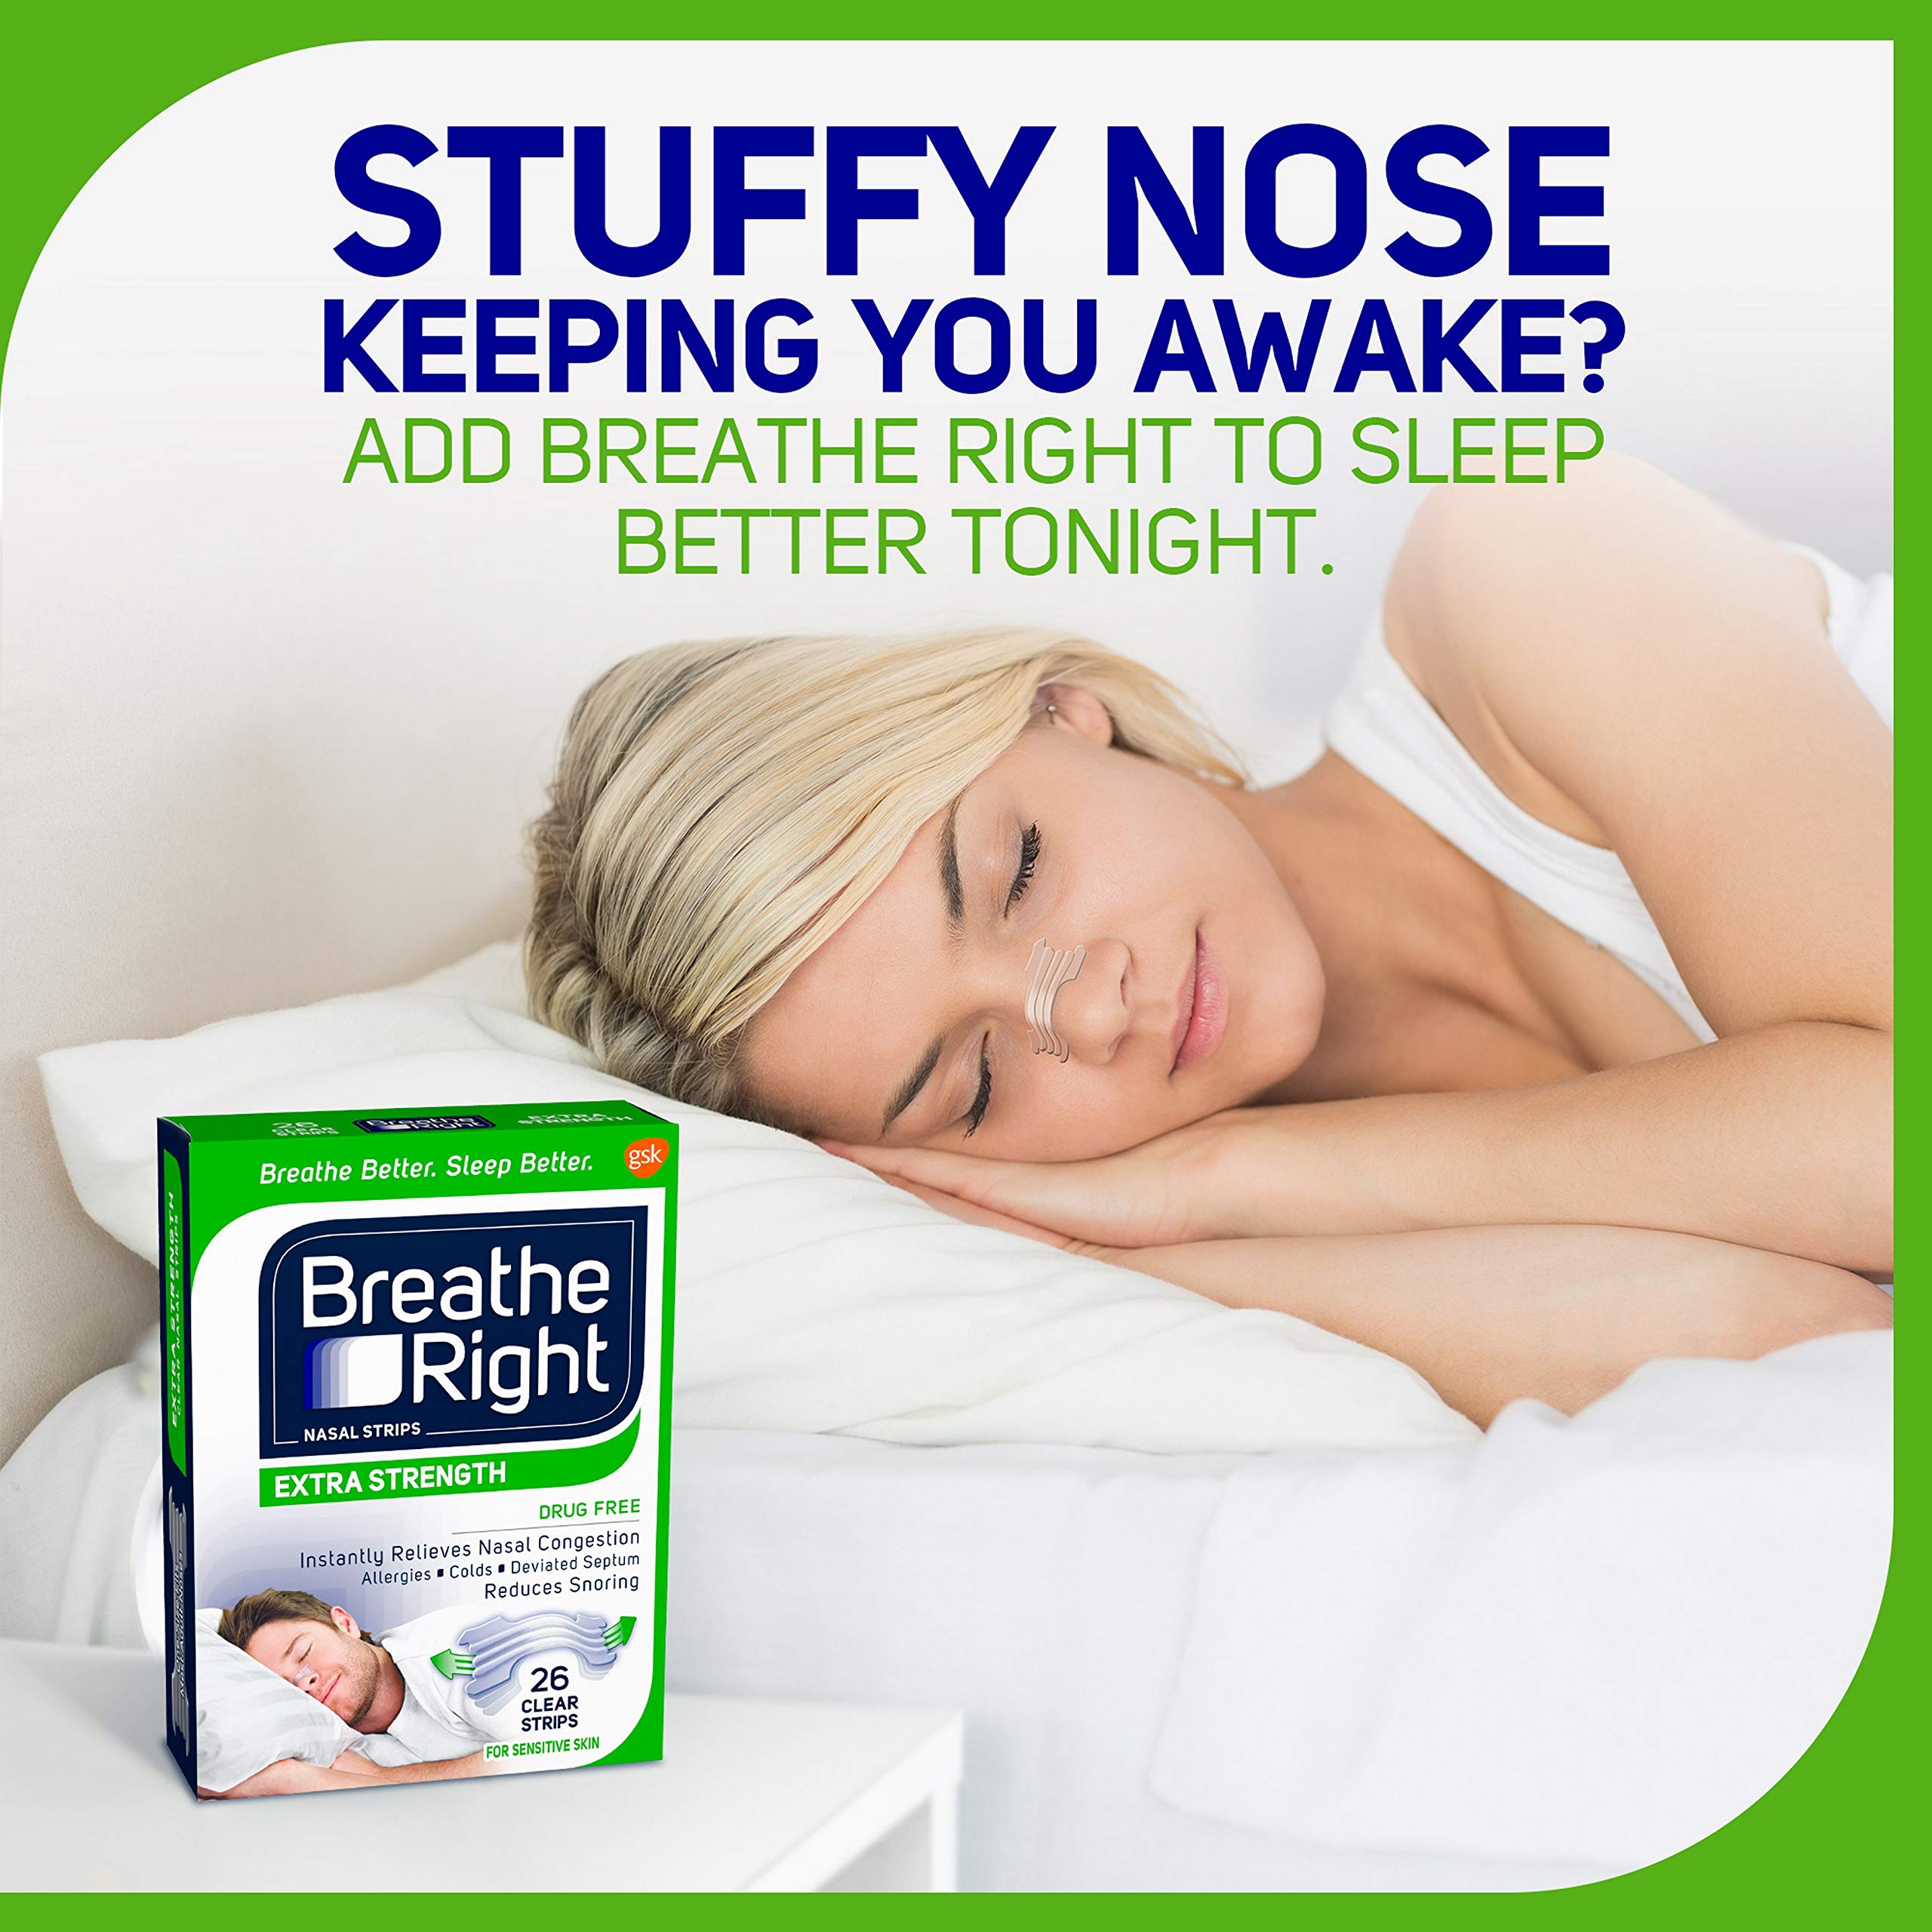 Breathe Right Extra Strength Clear Drug-Free Nasal Strips for Congestion Relief